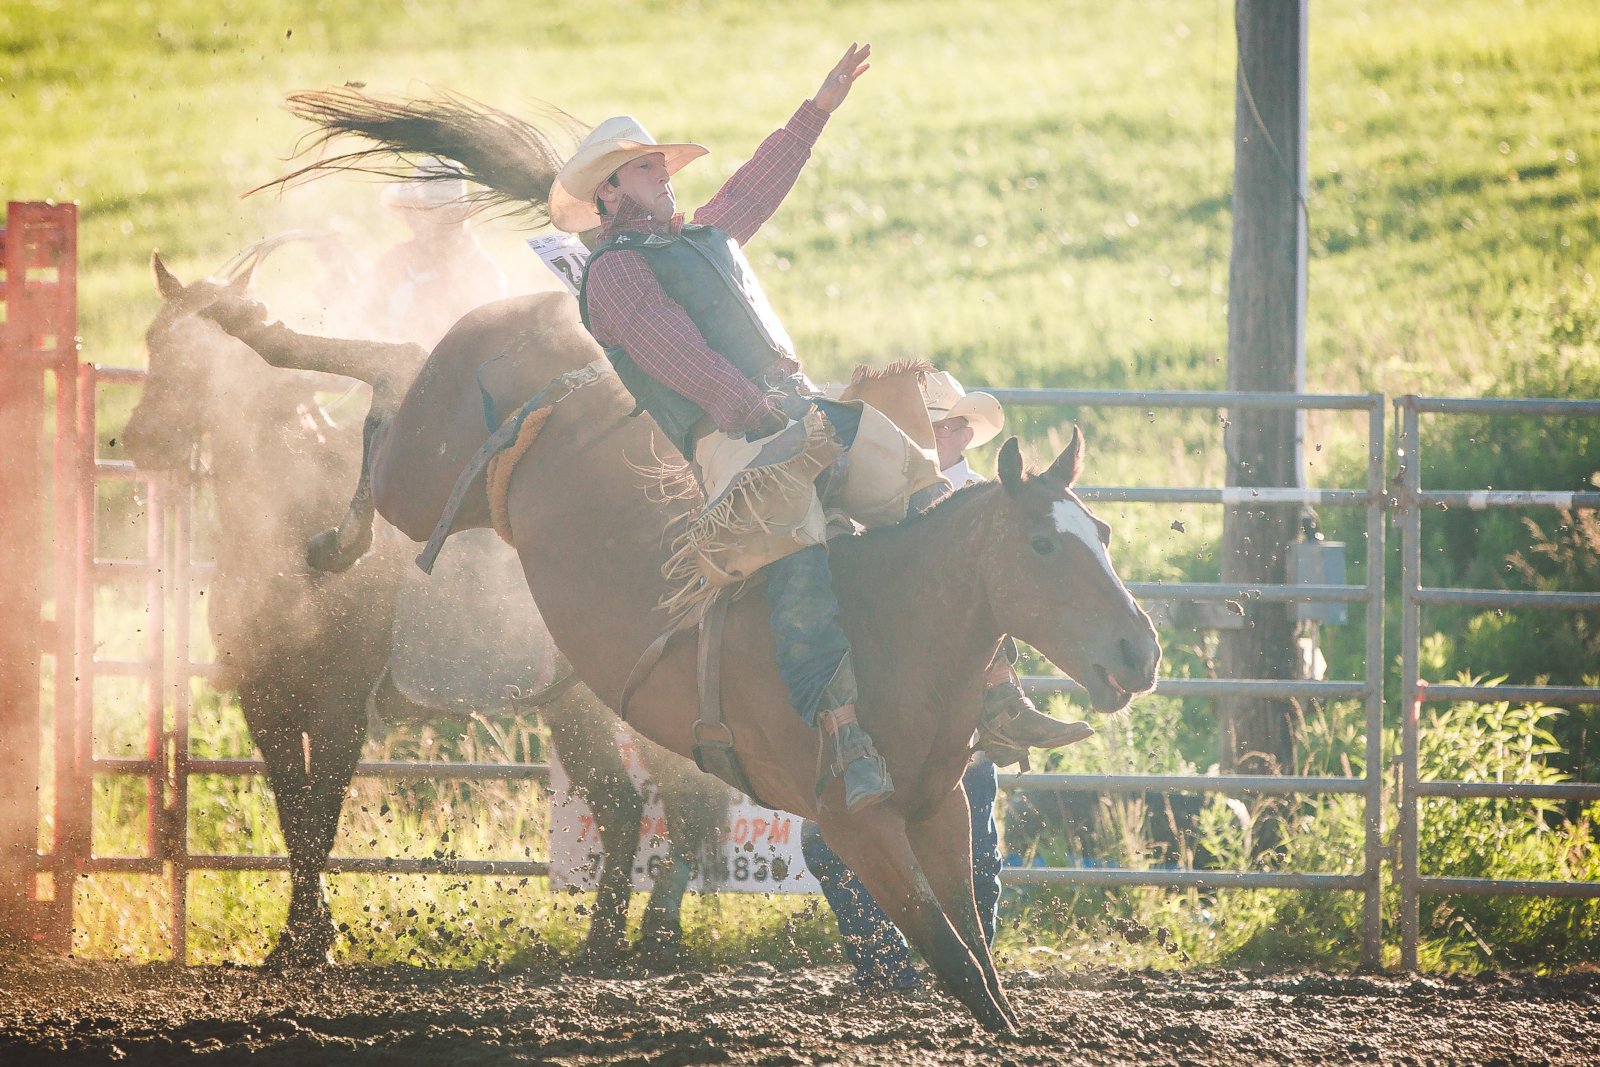 Bareback bronc riding at the Ellicottville Rodeo in July 2018!